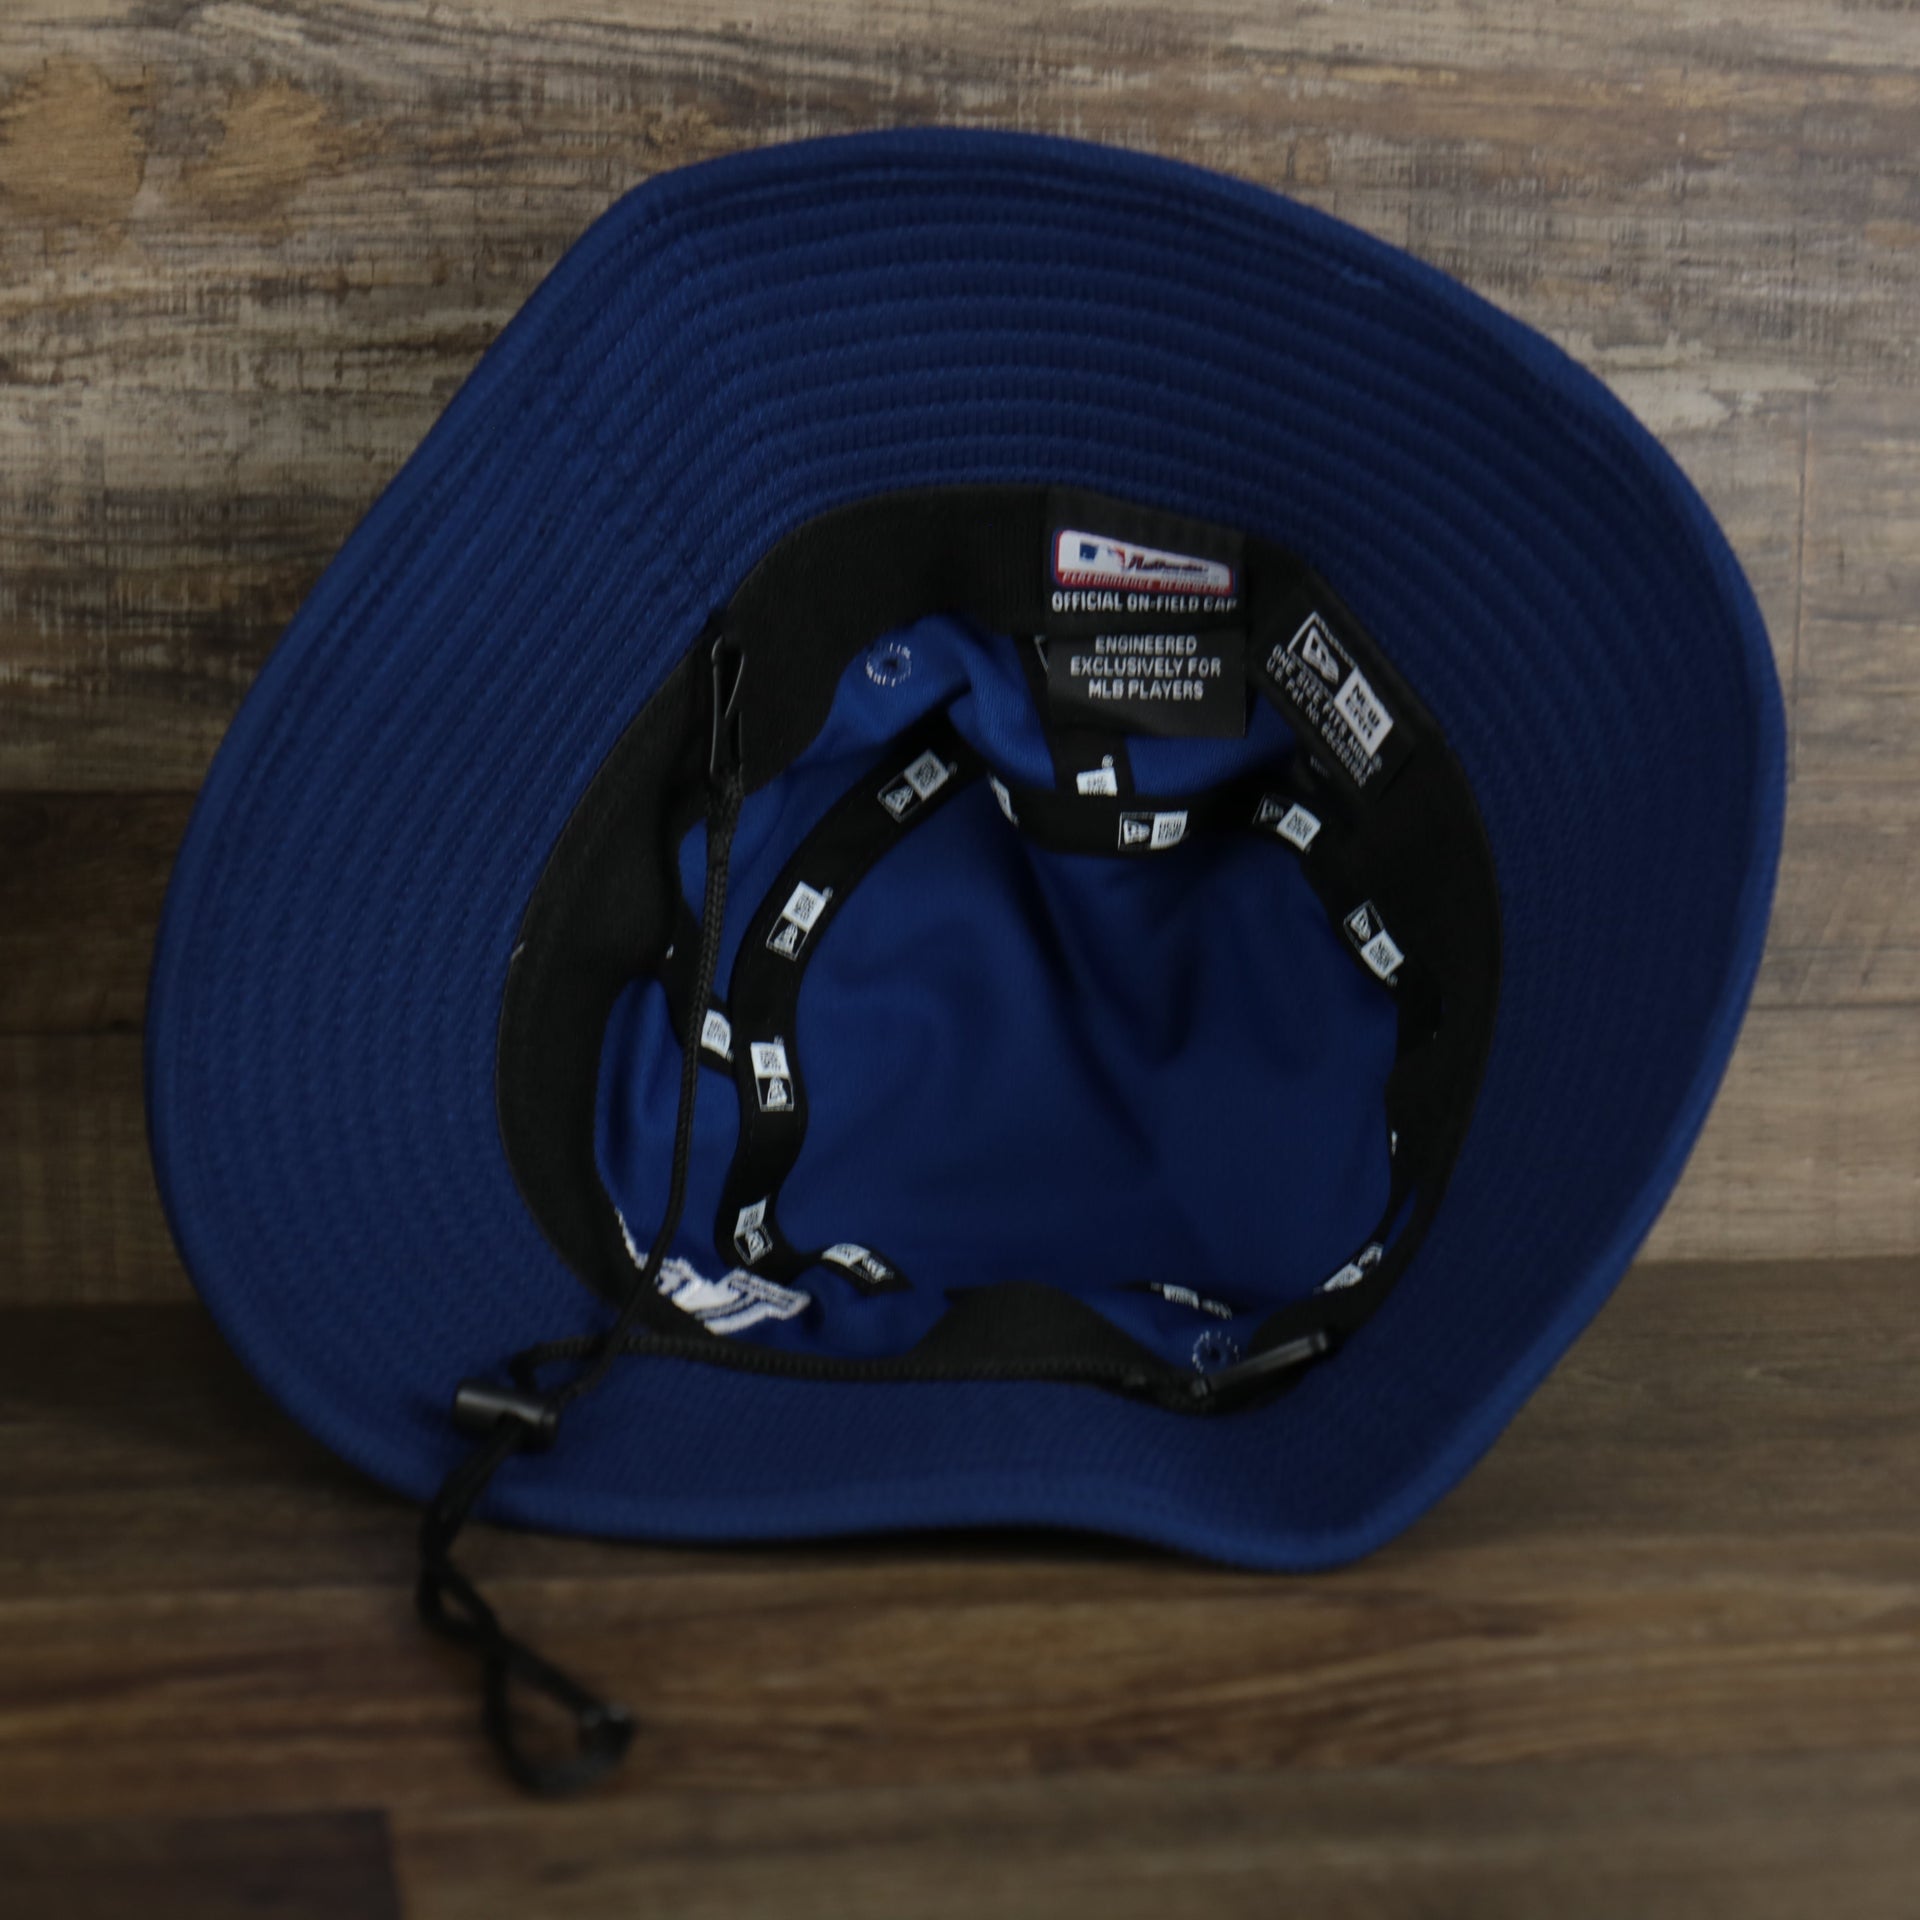 The underside of the Los Angeles Dodgers MLB 2022 Spring Training Onfield Bucket Hat